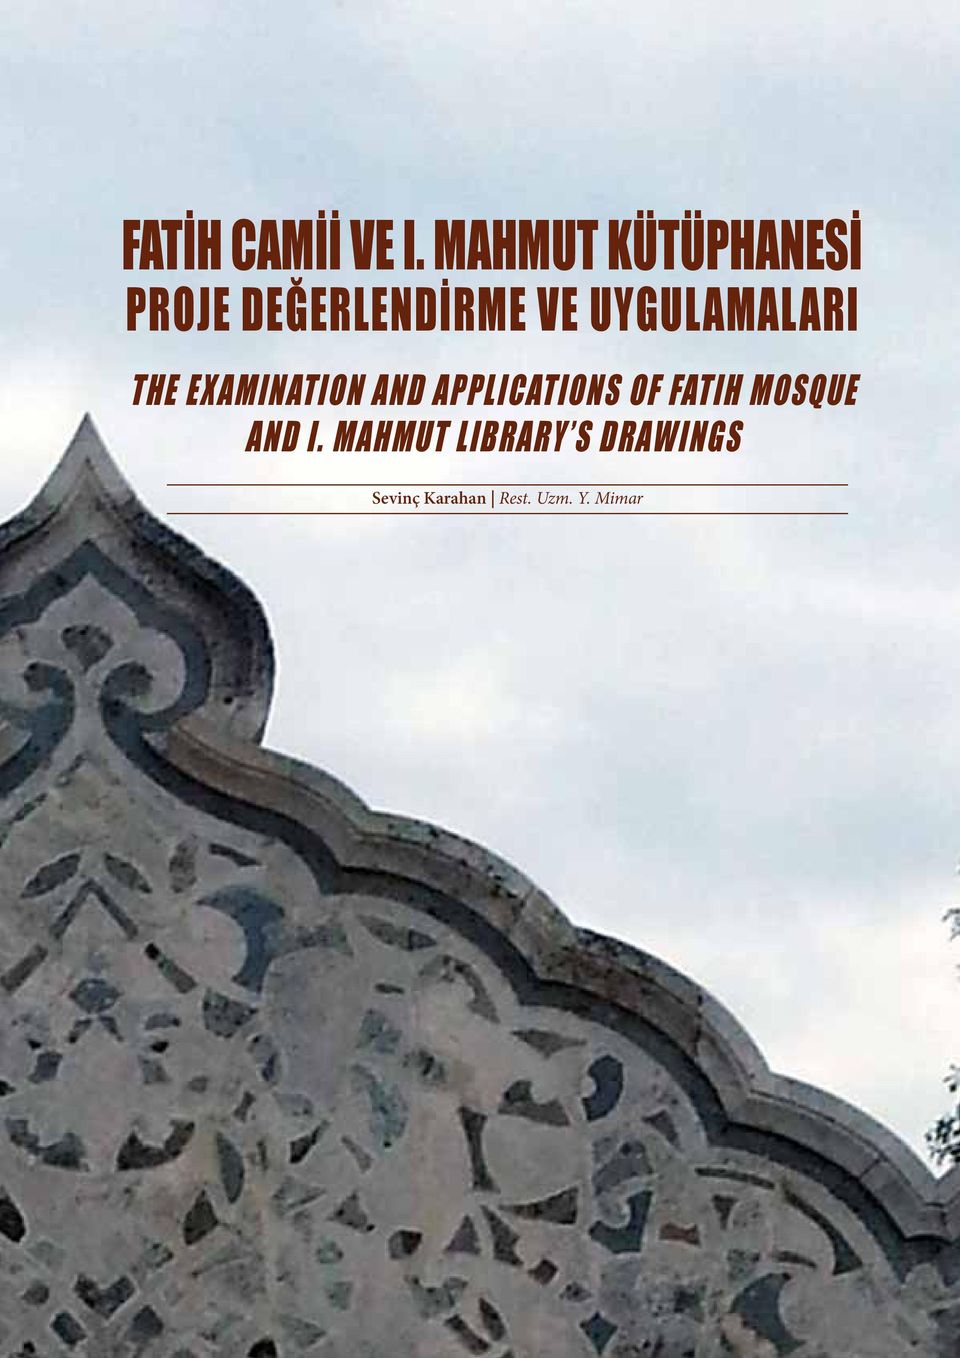 The Examination and Applications of Fatih Mosque and I.